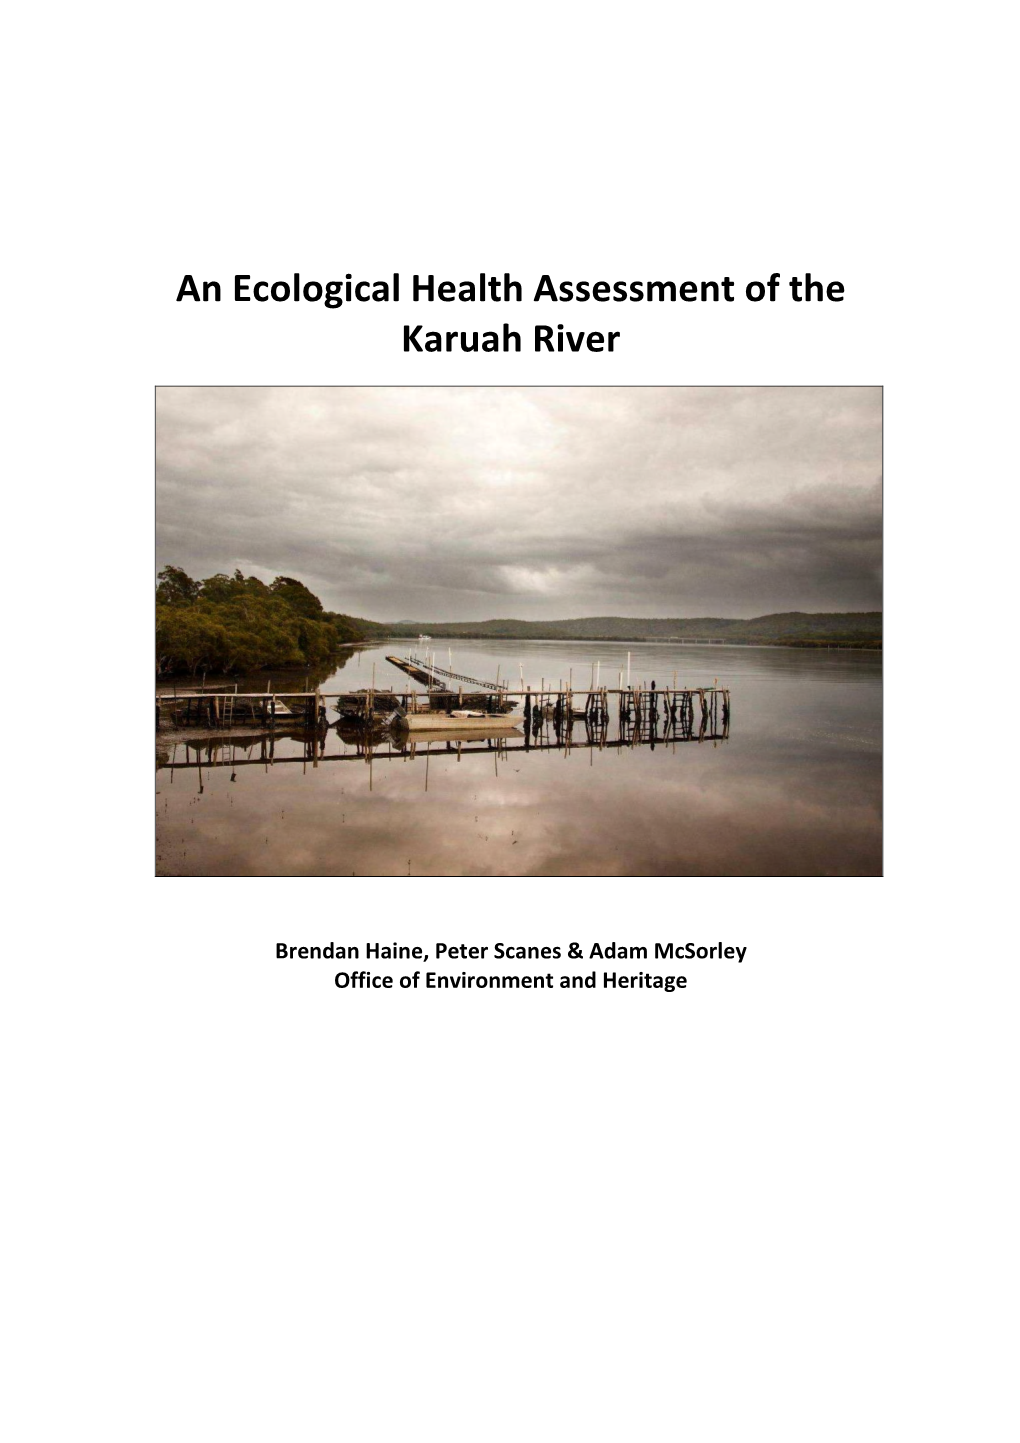 An Ecological Health Assessment of the Karuah River